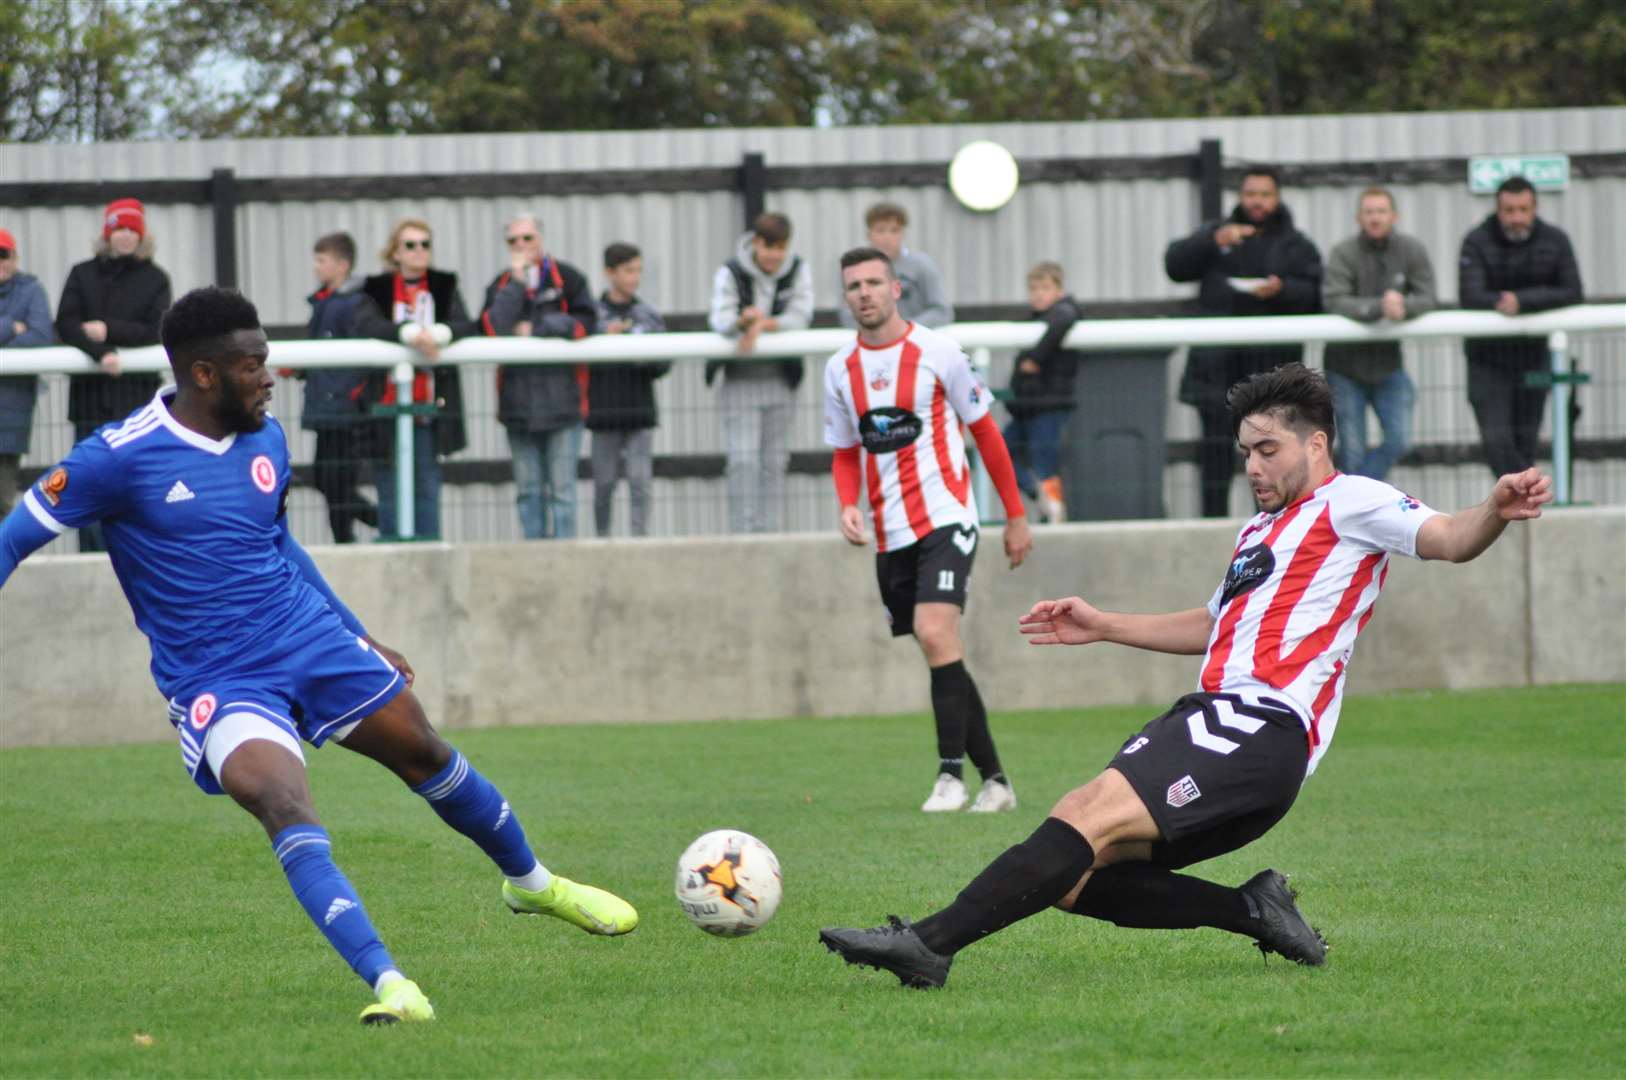 Sheppey's Richie Hamill - who scored in the FA Vase at Sutton Athletic last weekend - in action earlier this season. Picture: Paul Owen Richards (42994579)